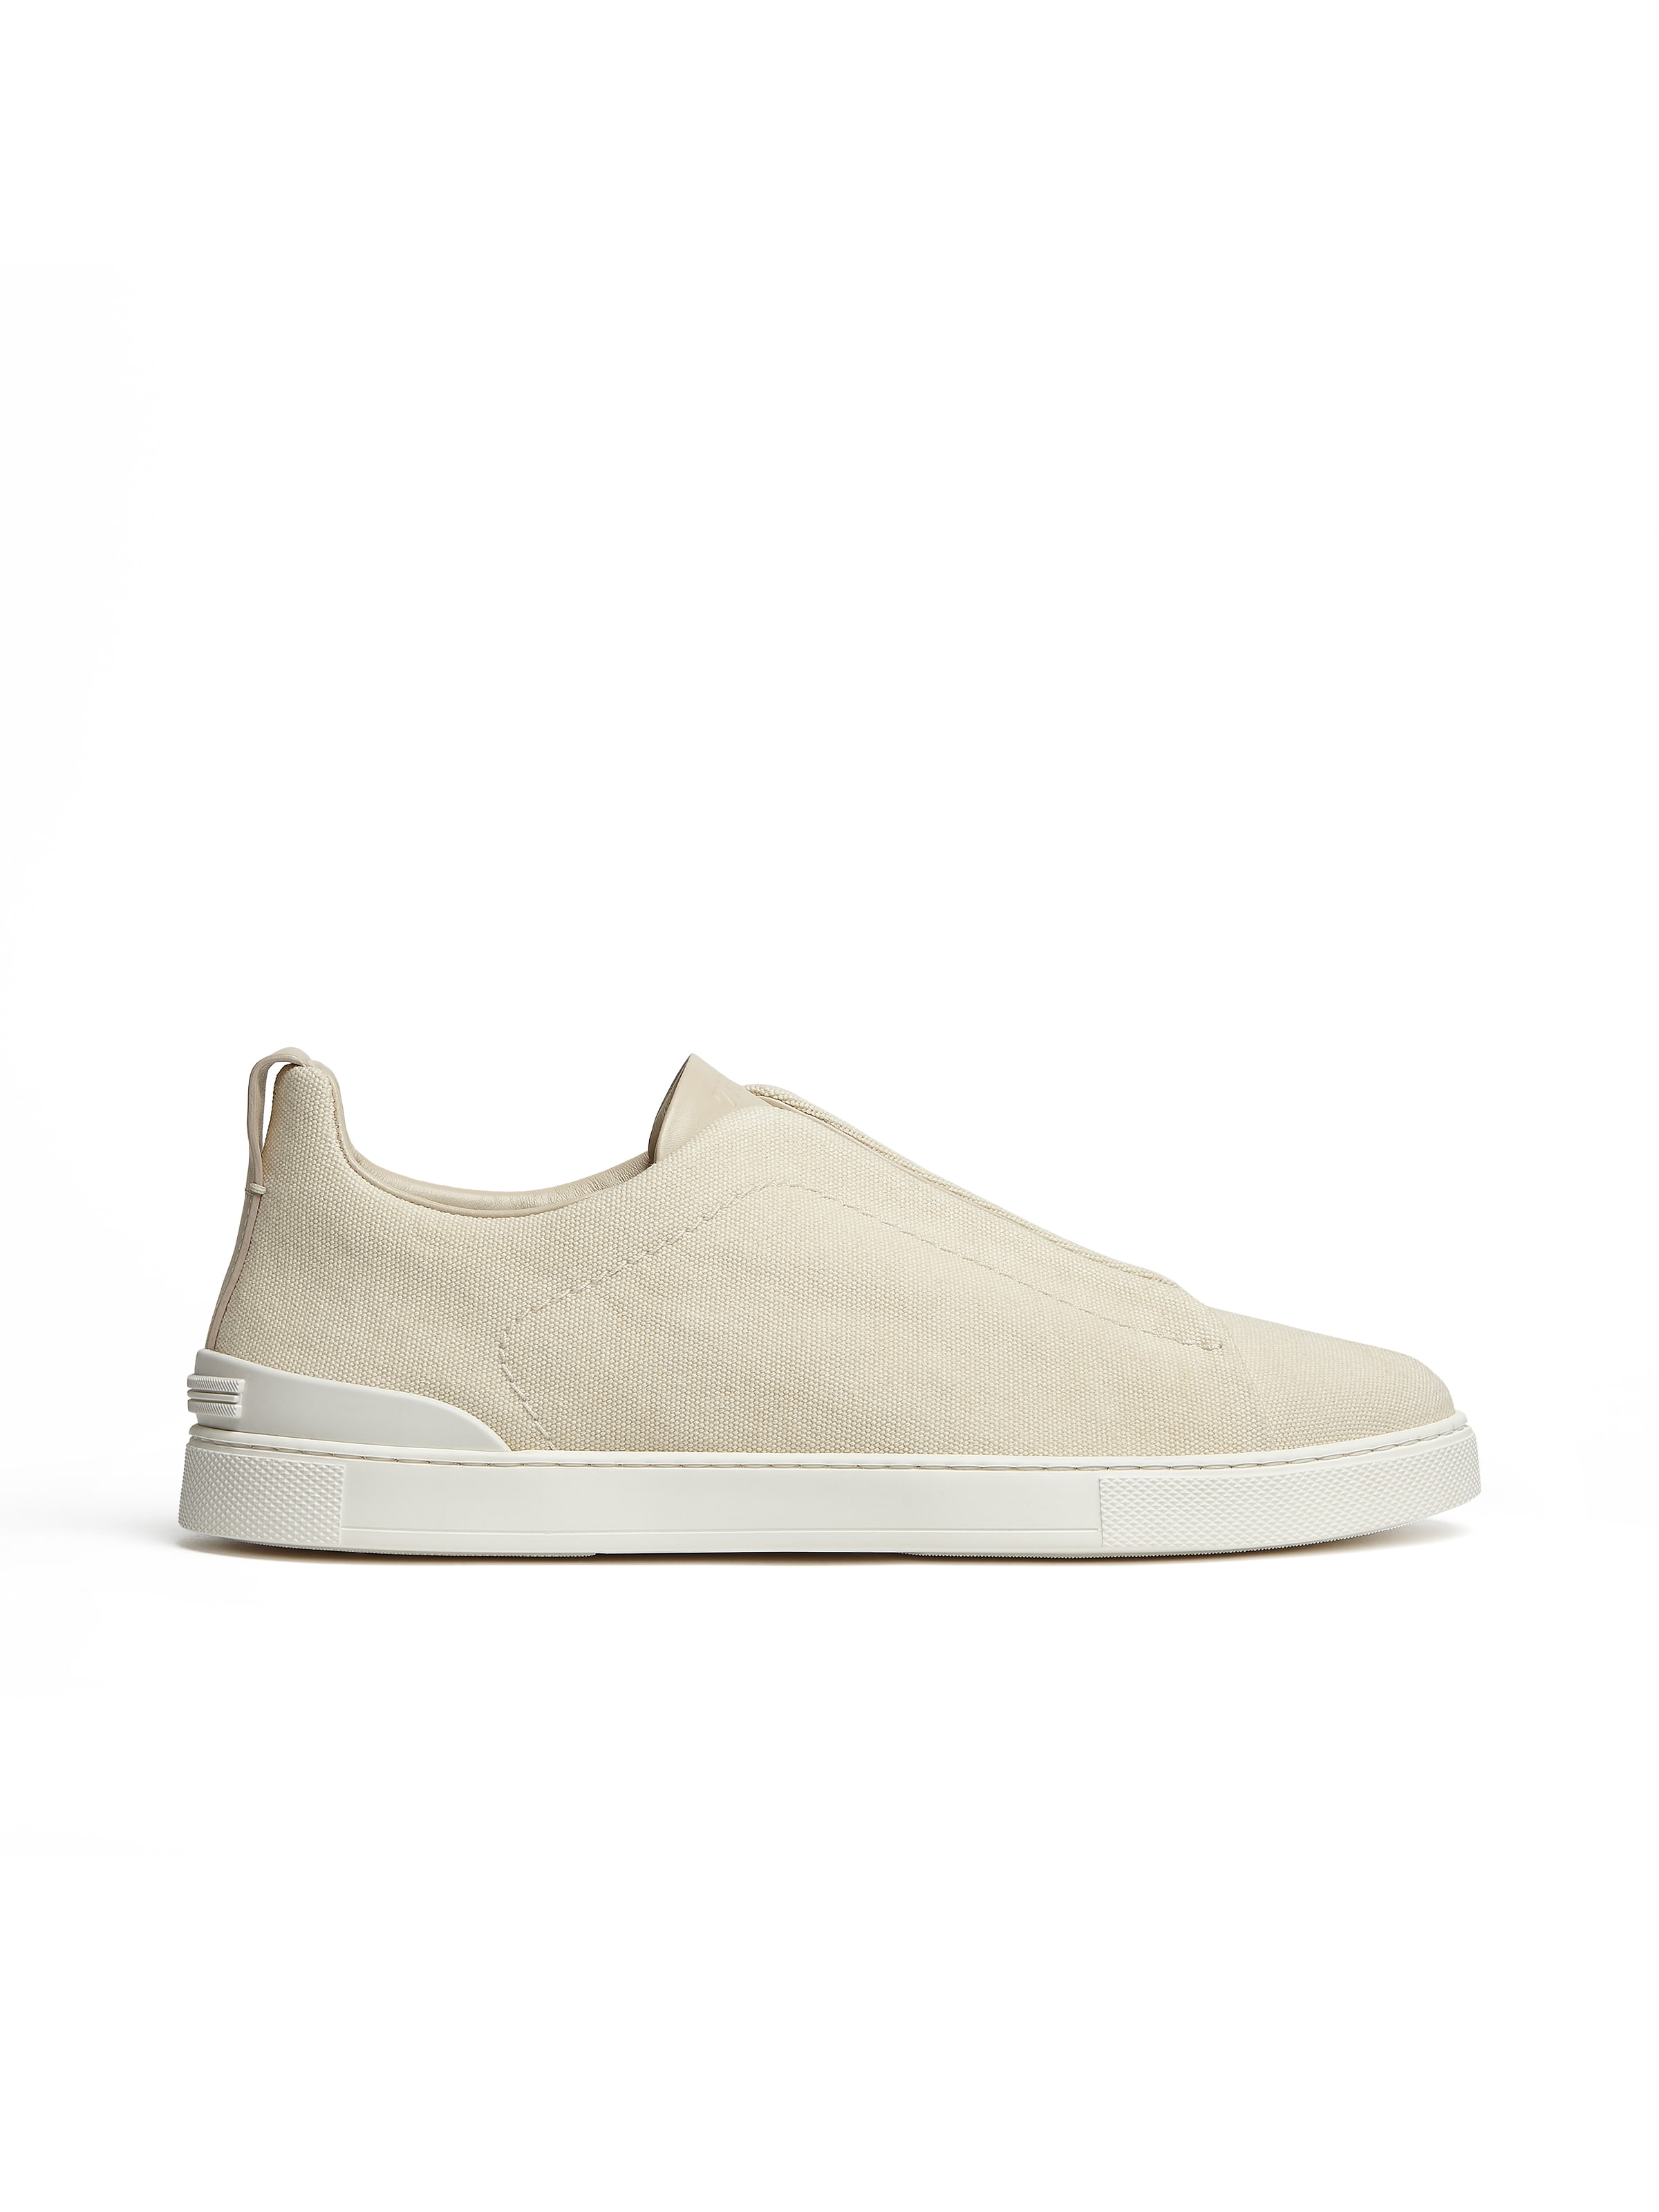 Zegna Off White Canvas Triple Stitch Low Top Sneakers